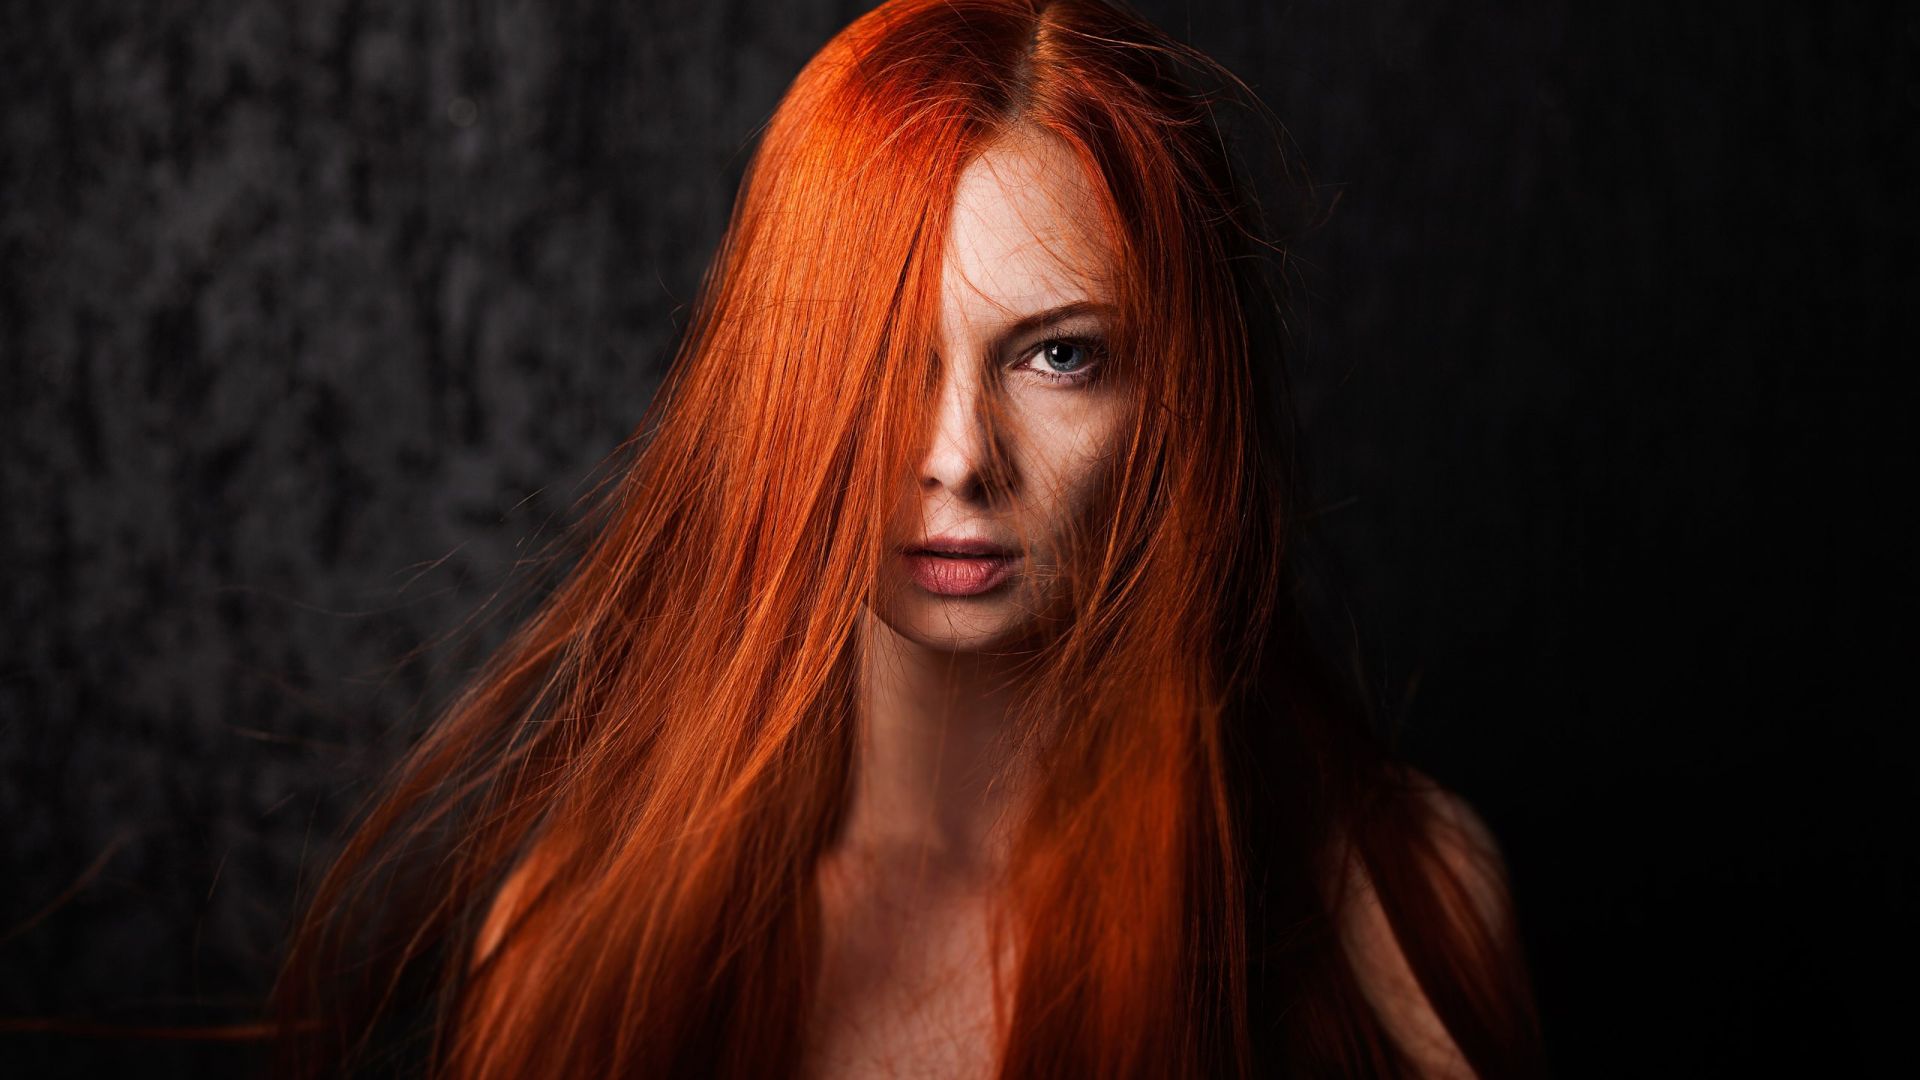 Desktop Wallpaper Red Head Long Hair On Face Model Hd Image Picture